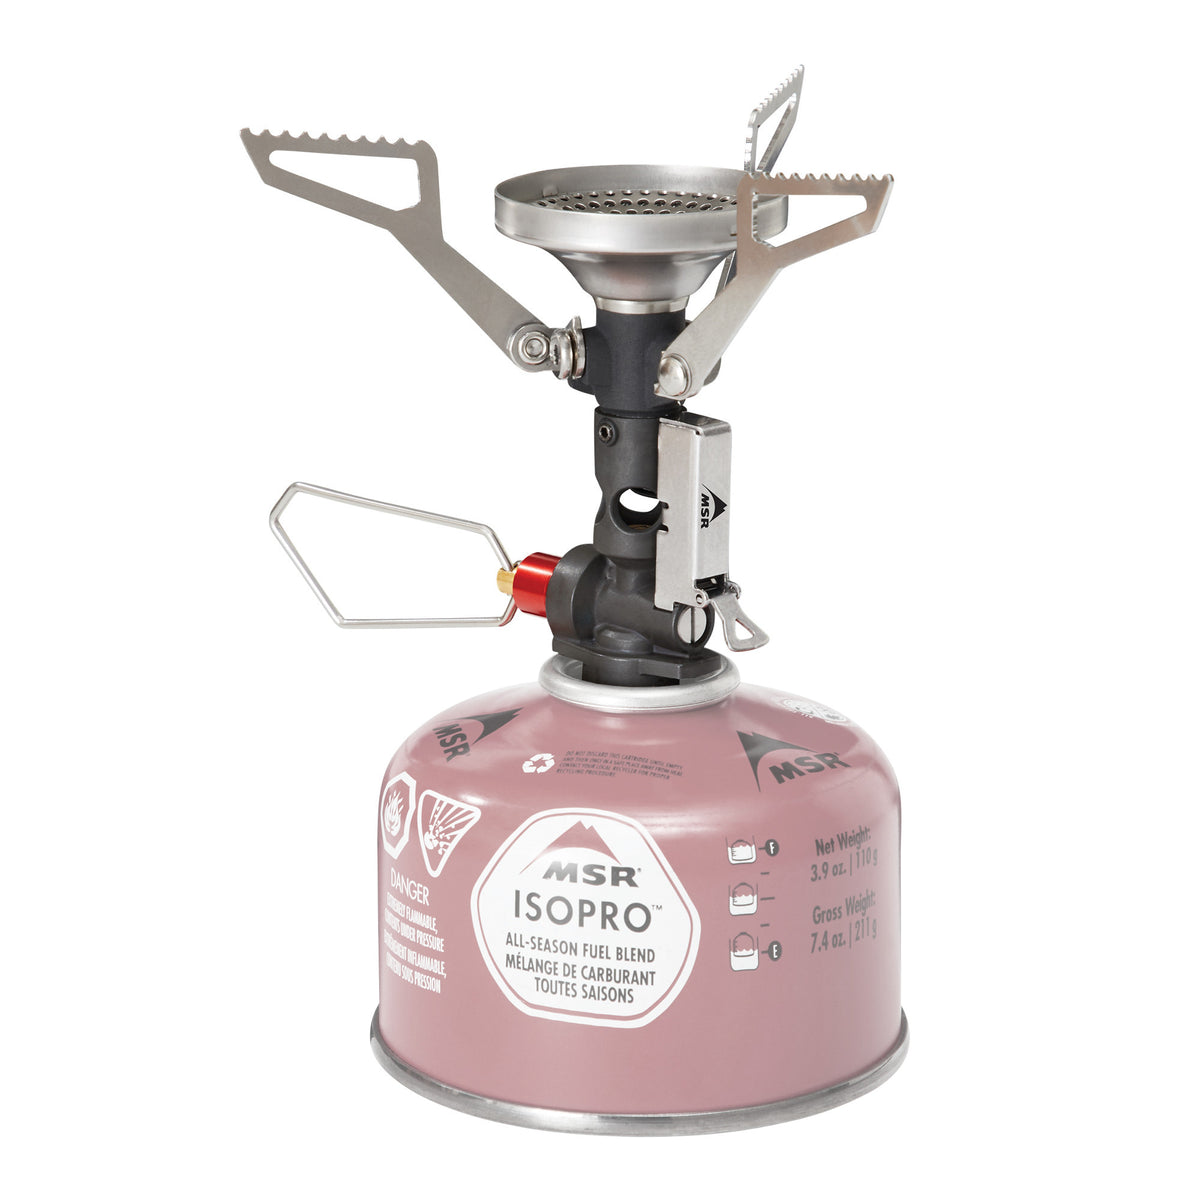 MSR Pocket Rocket Deluxe camping stove, front view 